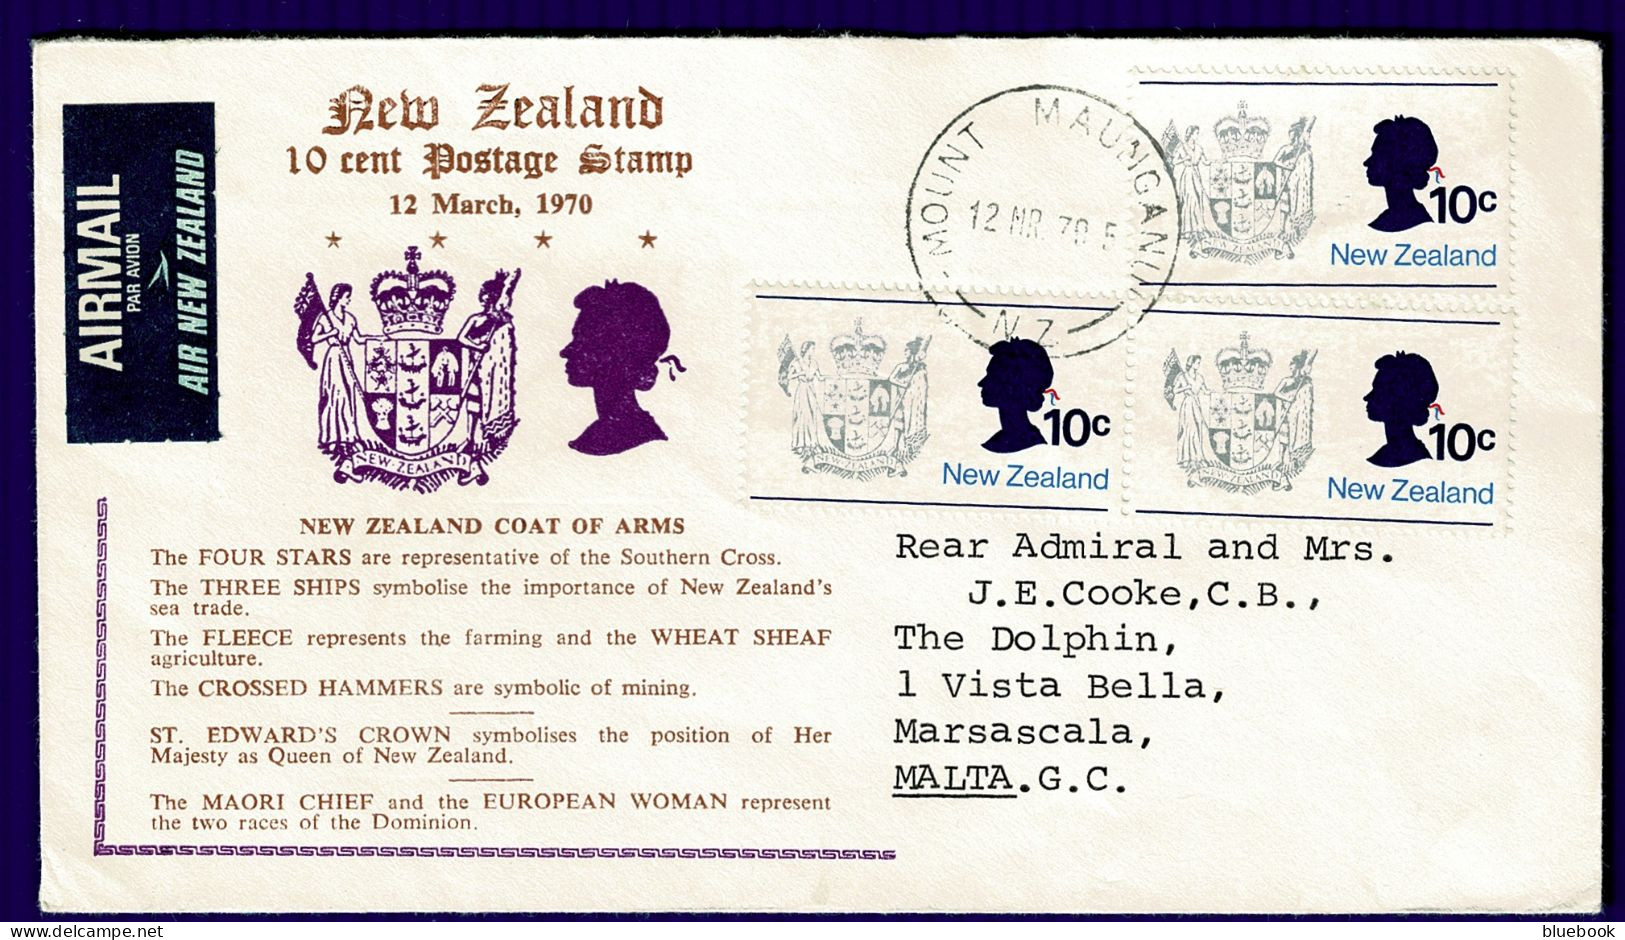 Ref 1636 - New Zealand 1970 FDC - 10c Arms Sideways Watermark - 30c Airmail Rate To Malta - FDC